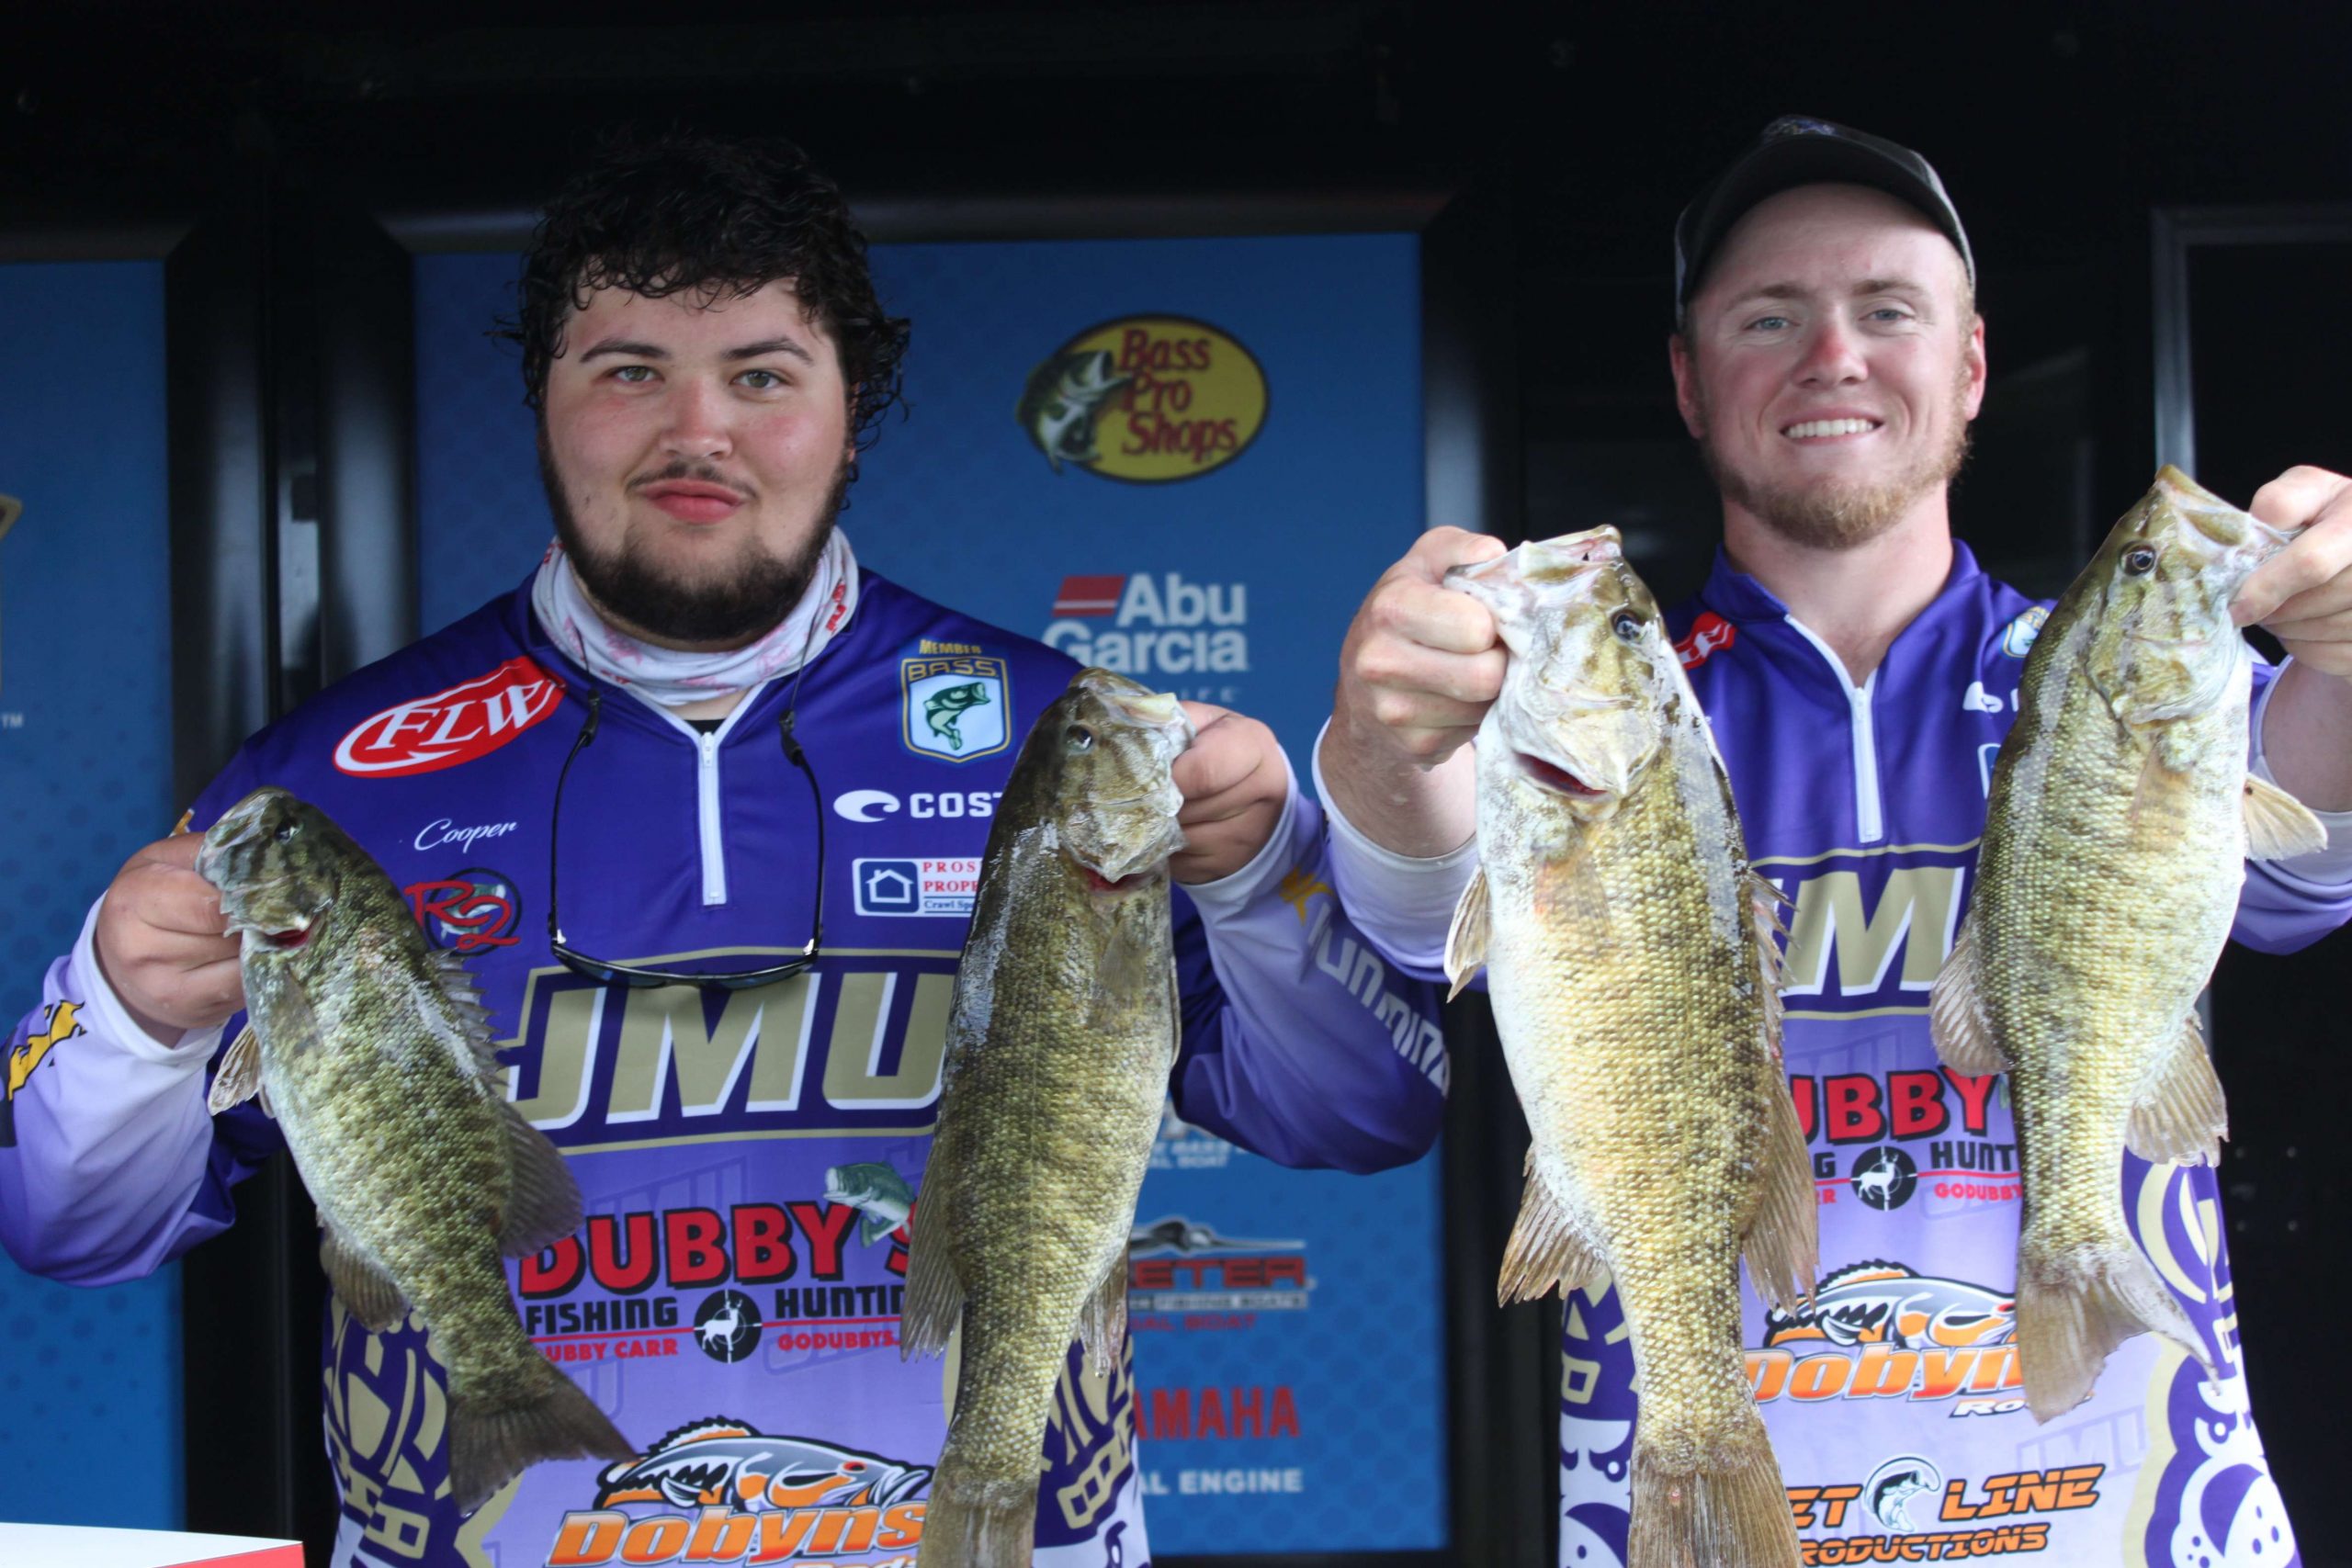 Blake Miles and Cooper Casilllas of James Madison University are tied for 71st with 11-8.